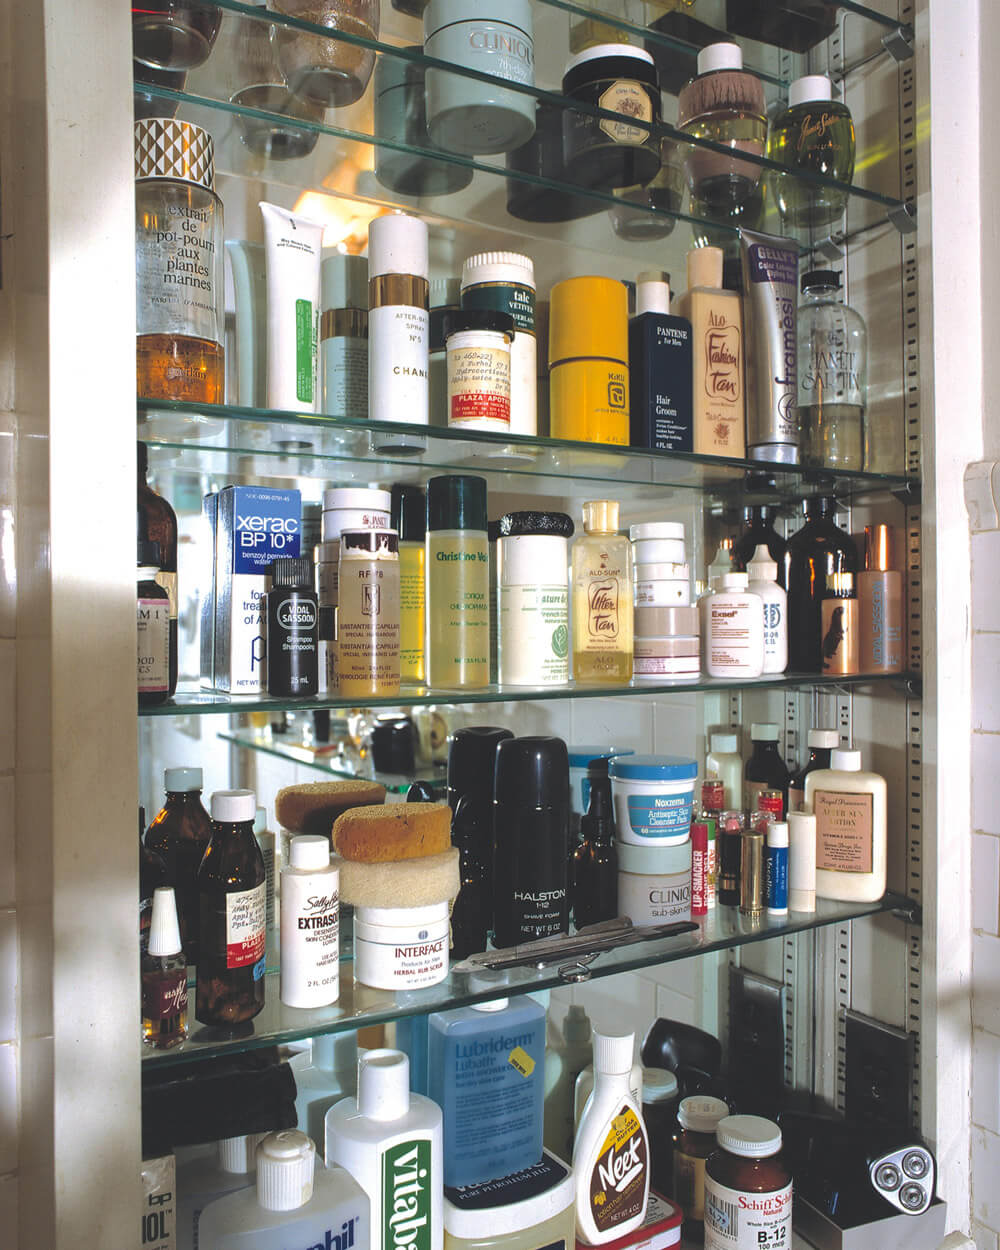 David Gamble, Andy Warhol’s Medicine Cabinet, 1987. Gamble, who took the photograph shortly after Warhol’s death, imagined it as a portrait of the artist. The prescription drugs in the cabinet seem to have been issued by Dr. Karen Burke, Warhol’s dermatologist, who  is often mentioned in his diaries.